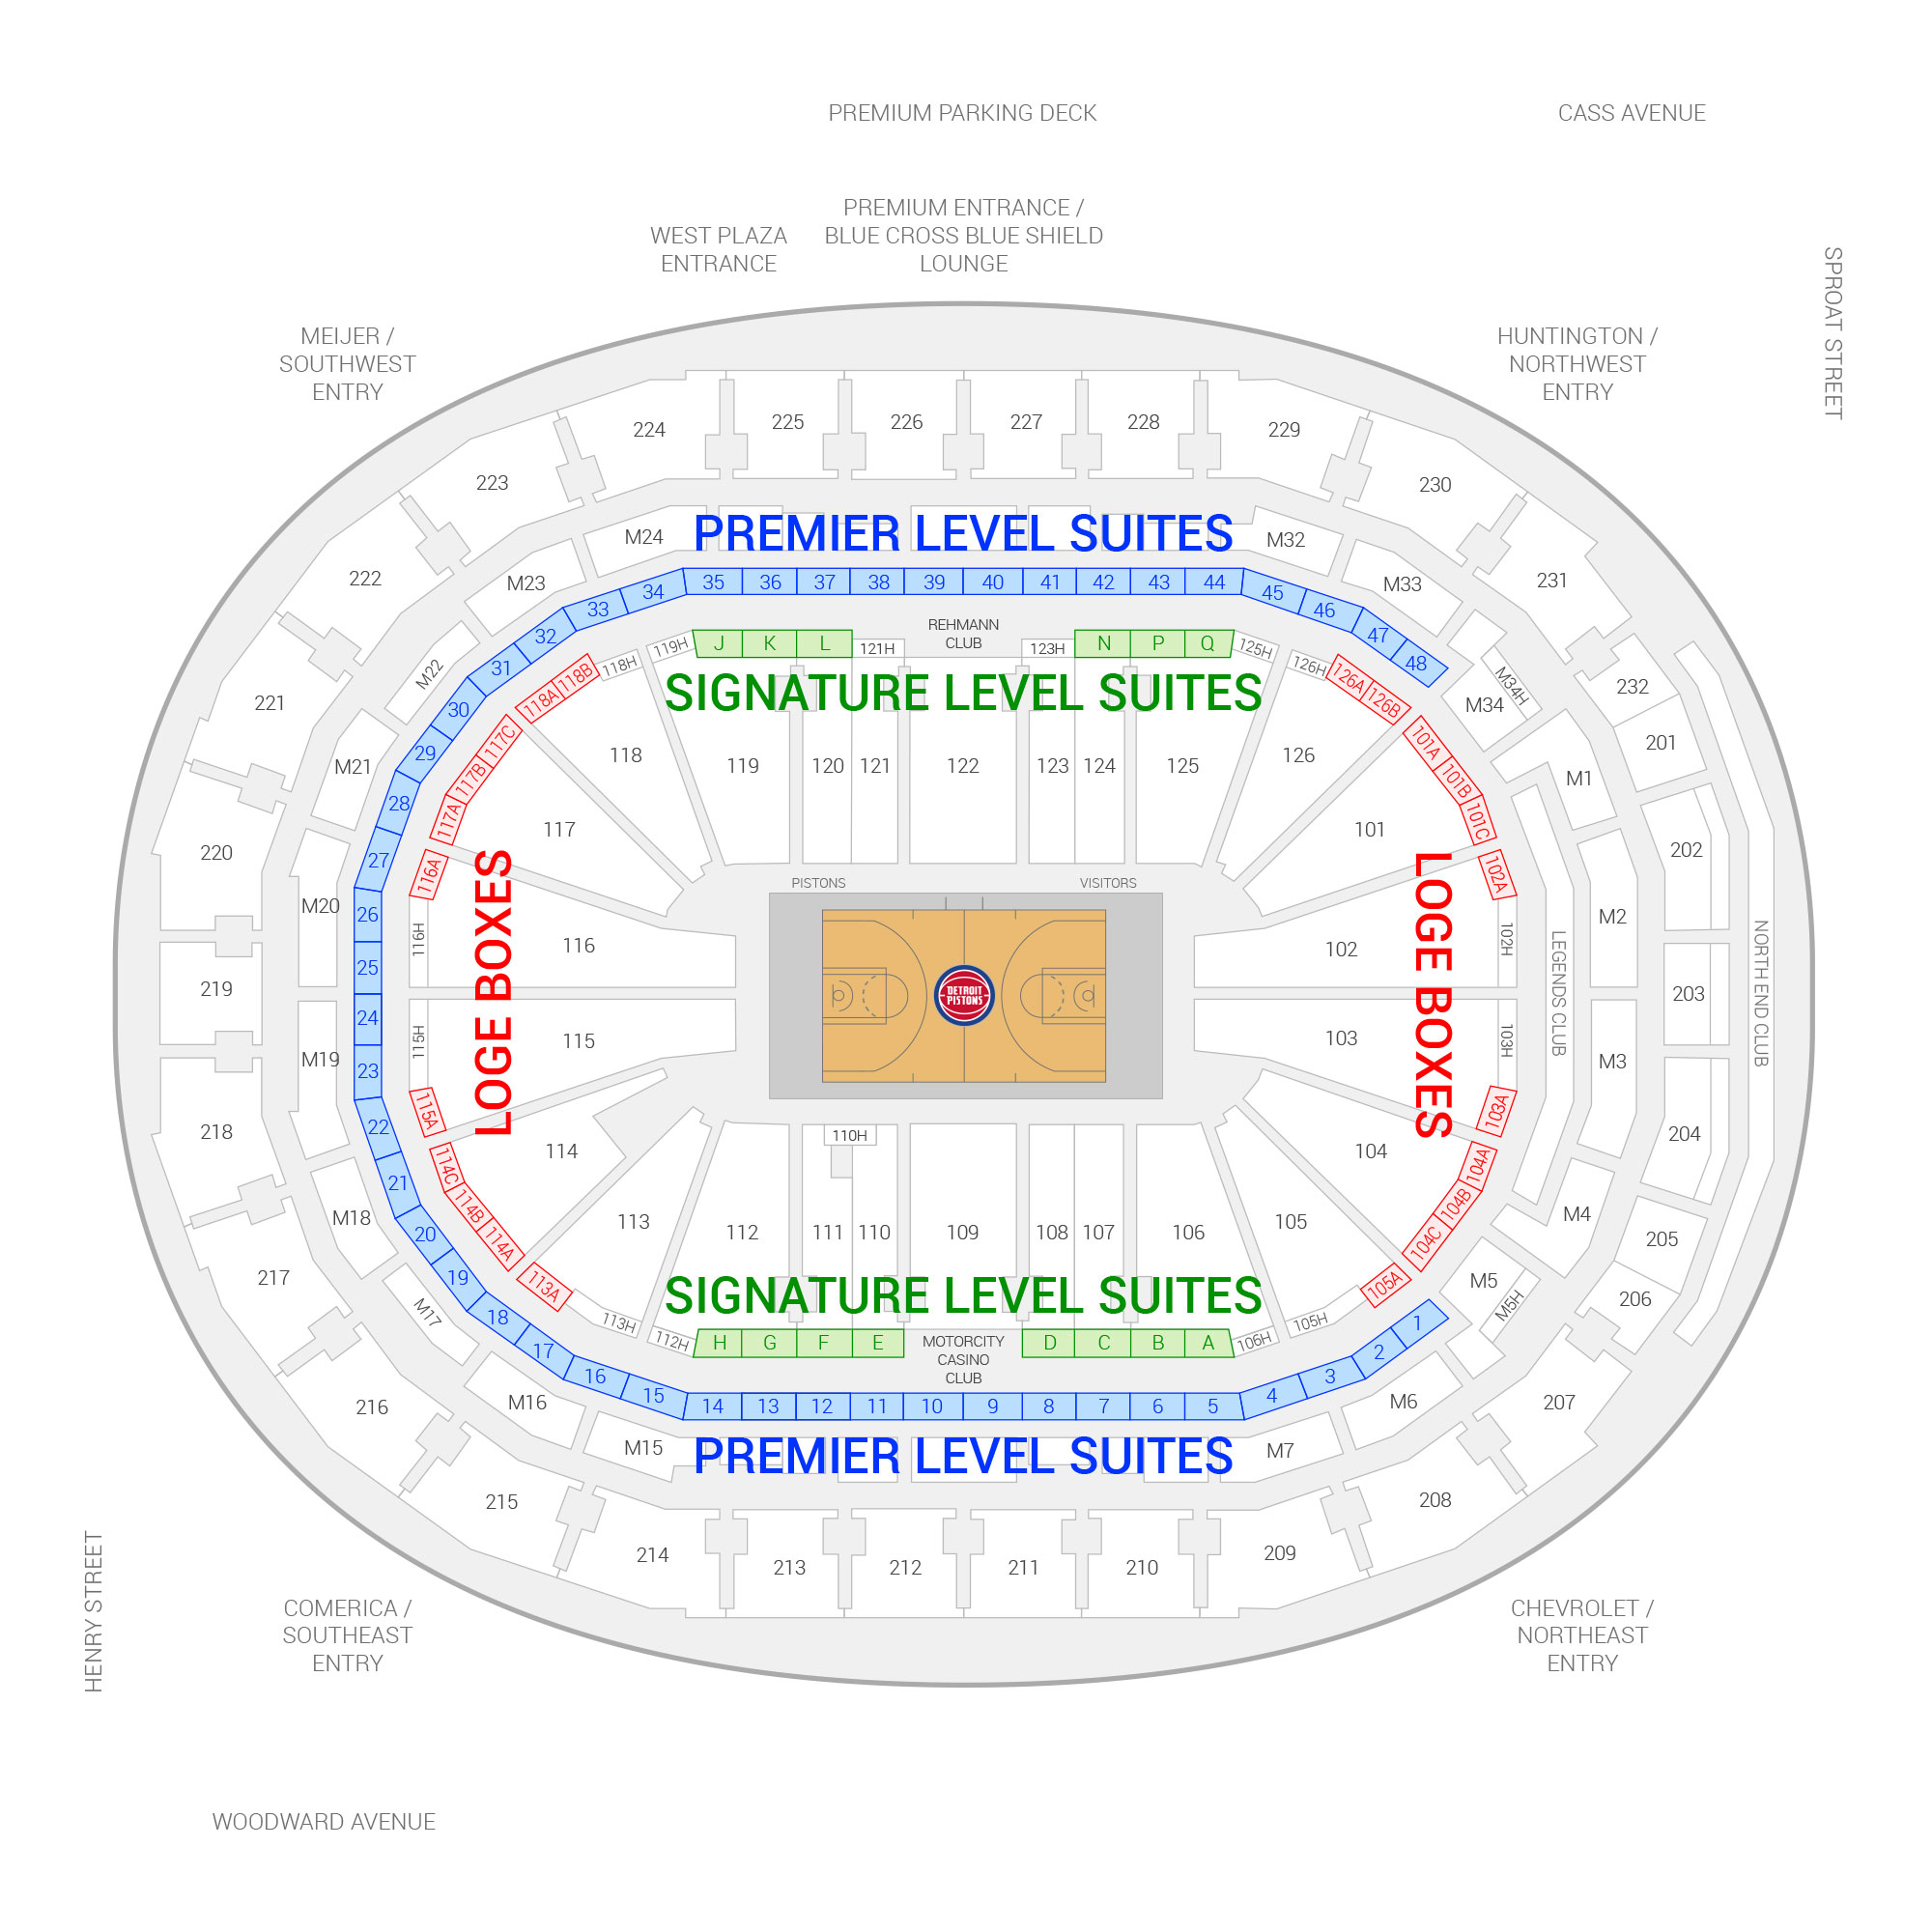 Little Caesars Arena / Detroit Pistons Suite Map and Seating Chart